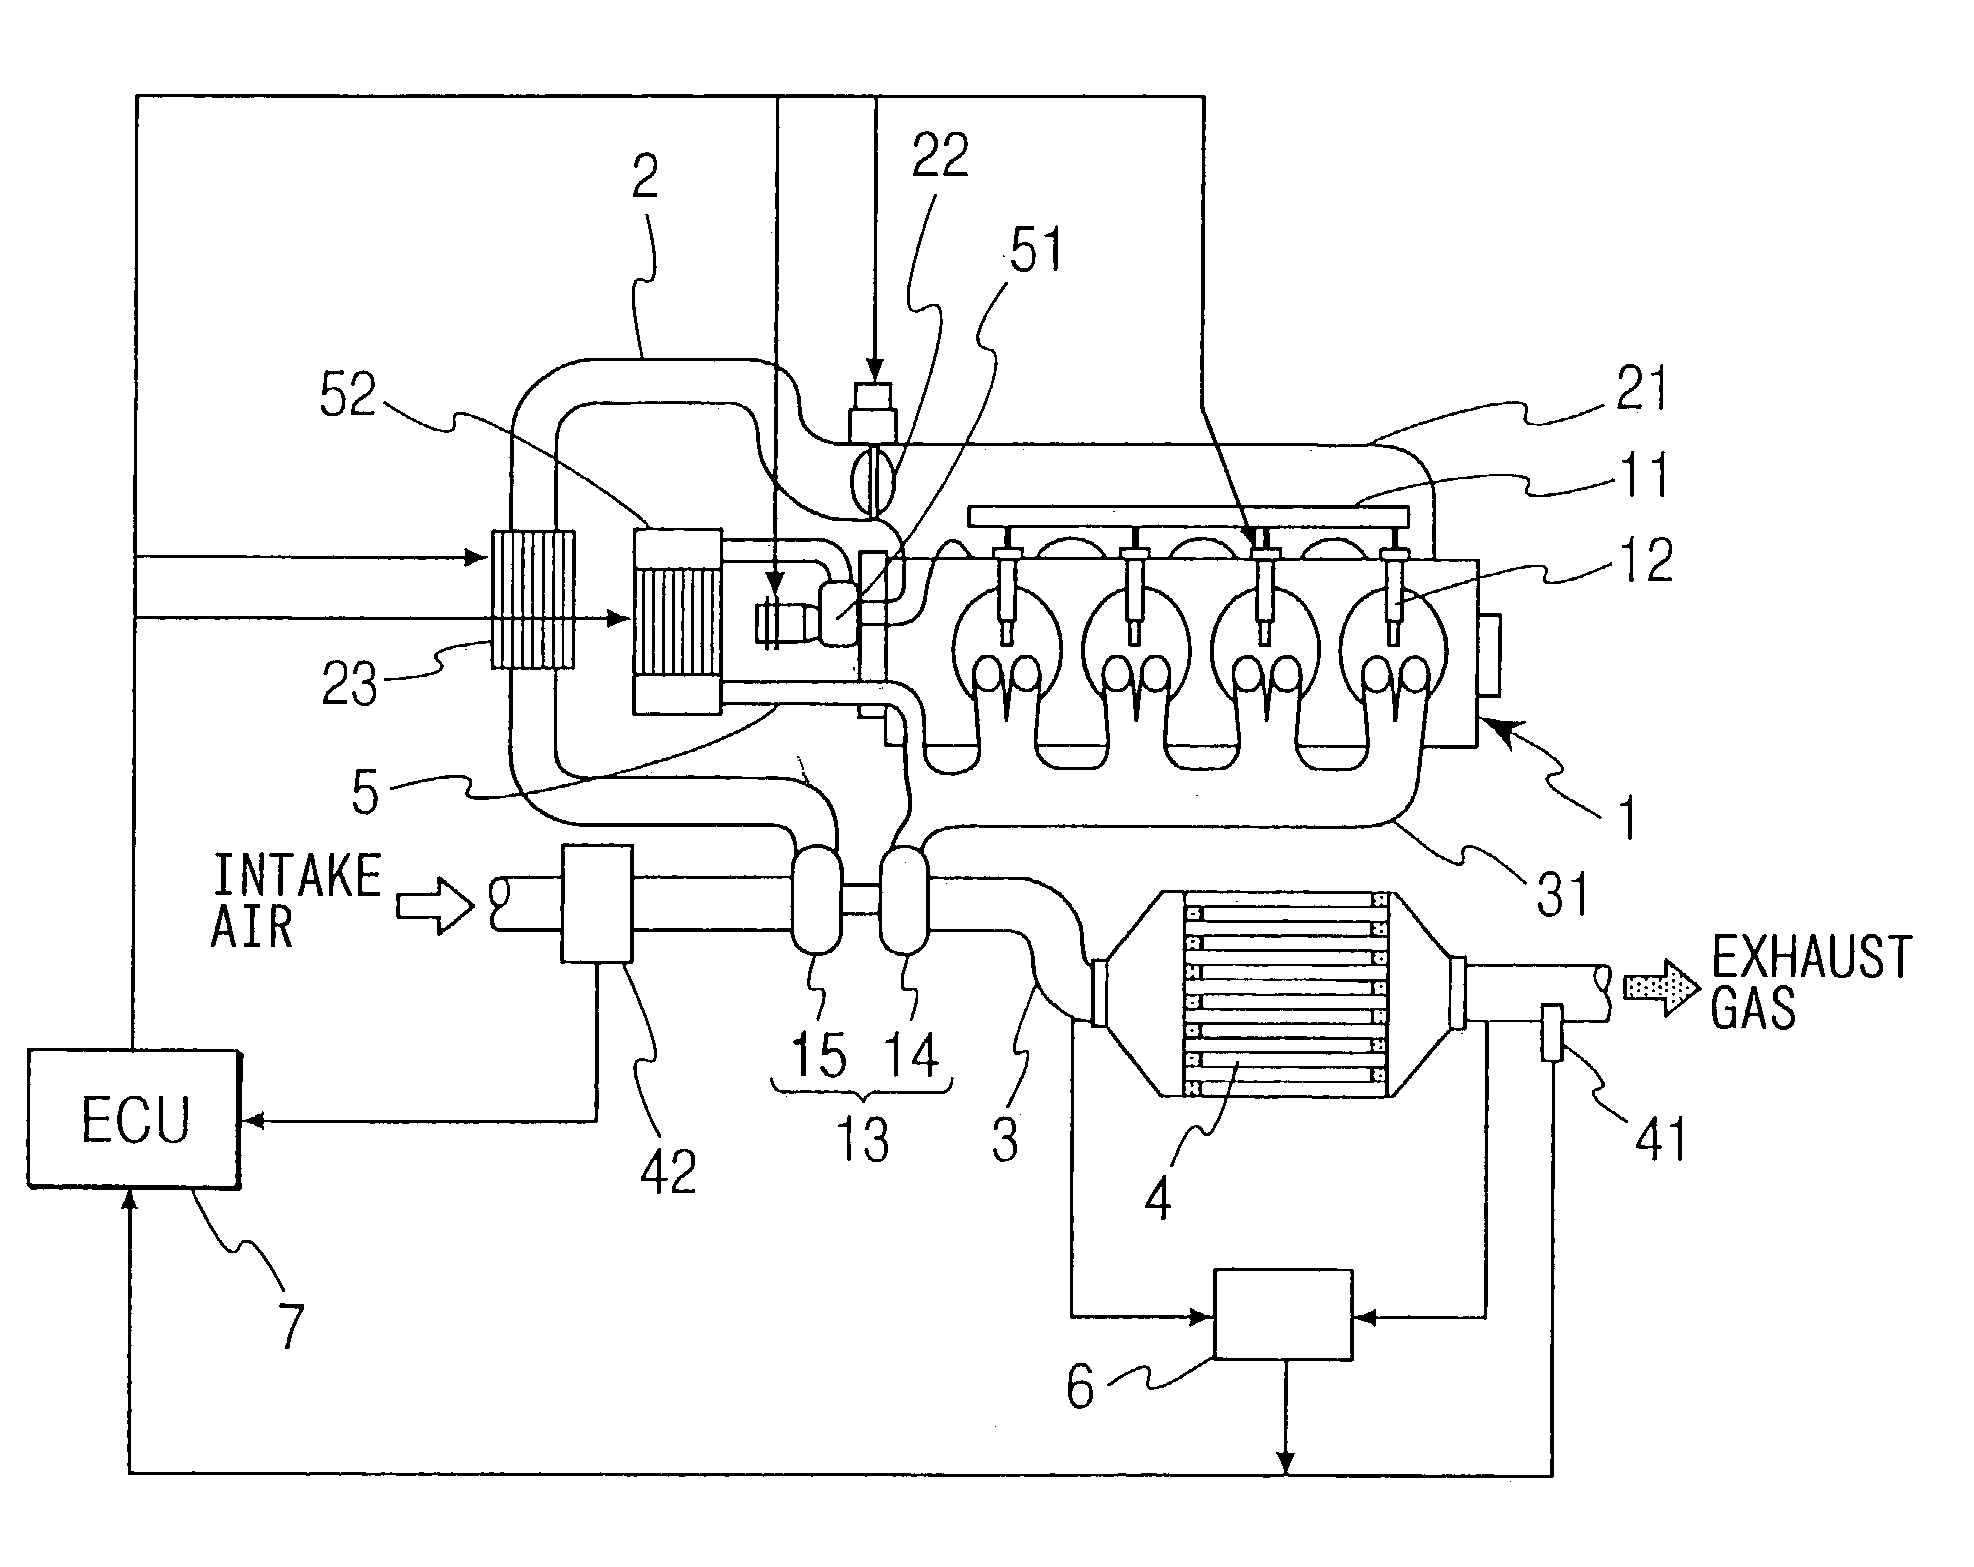 Exhaust gas cleaning system having particulate filter